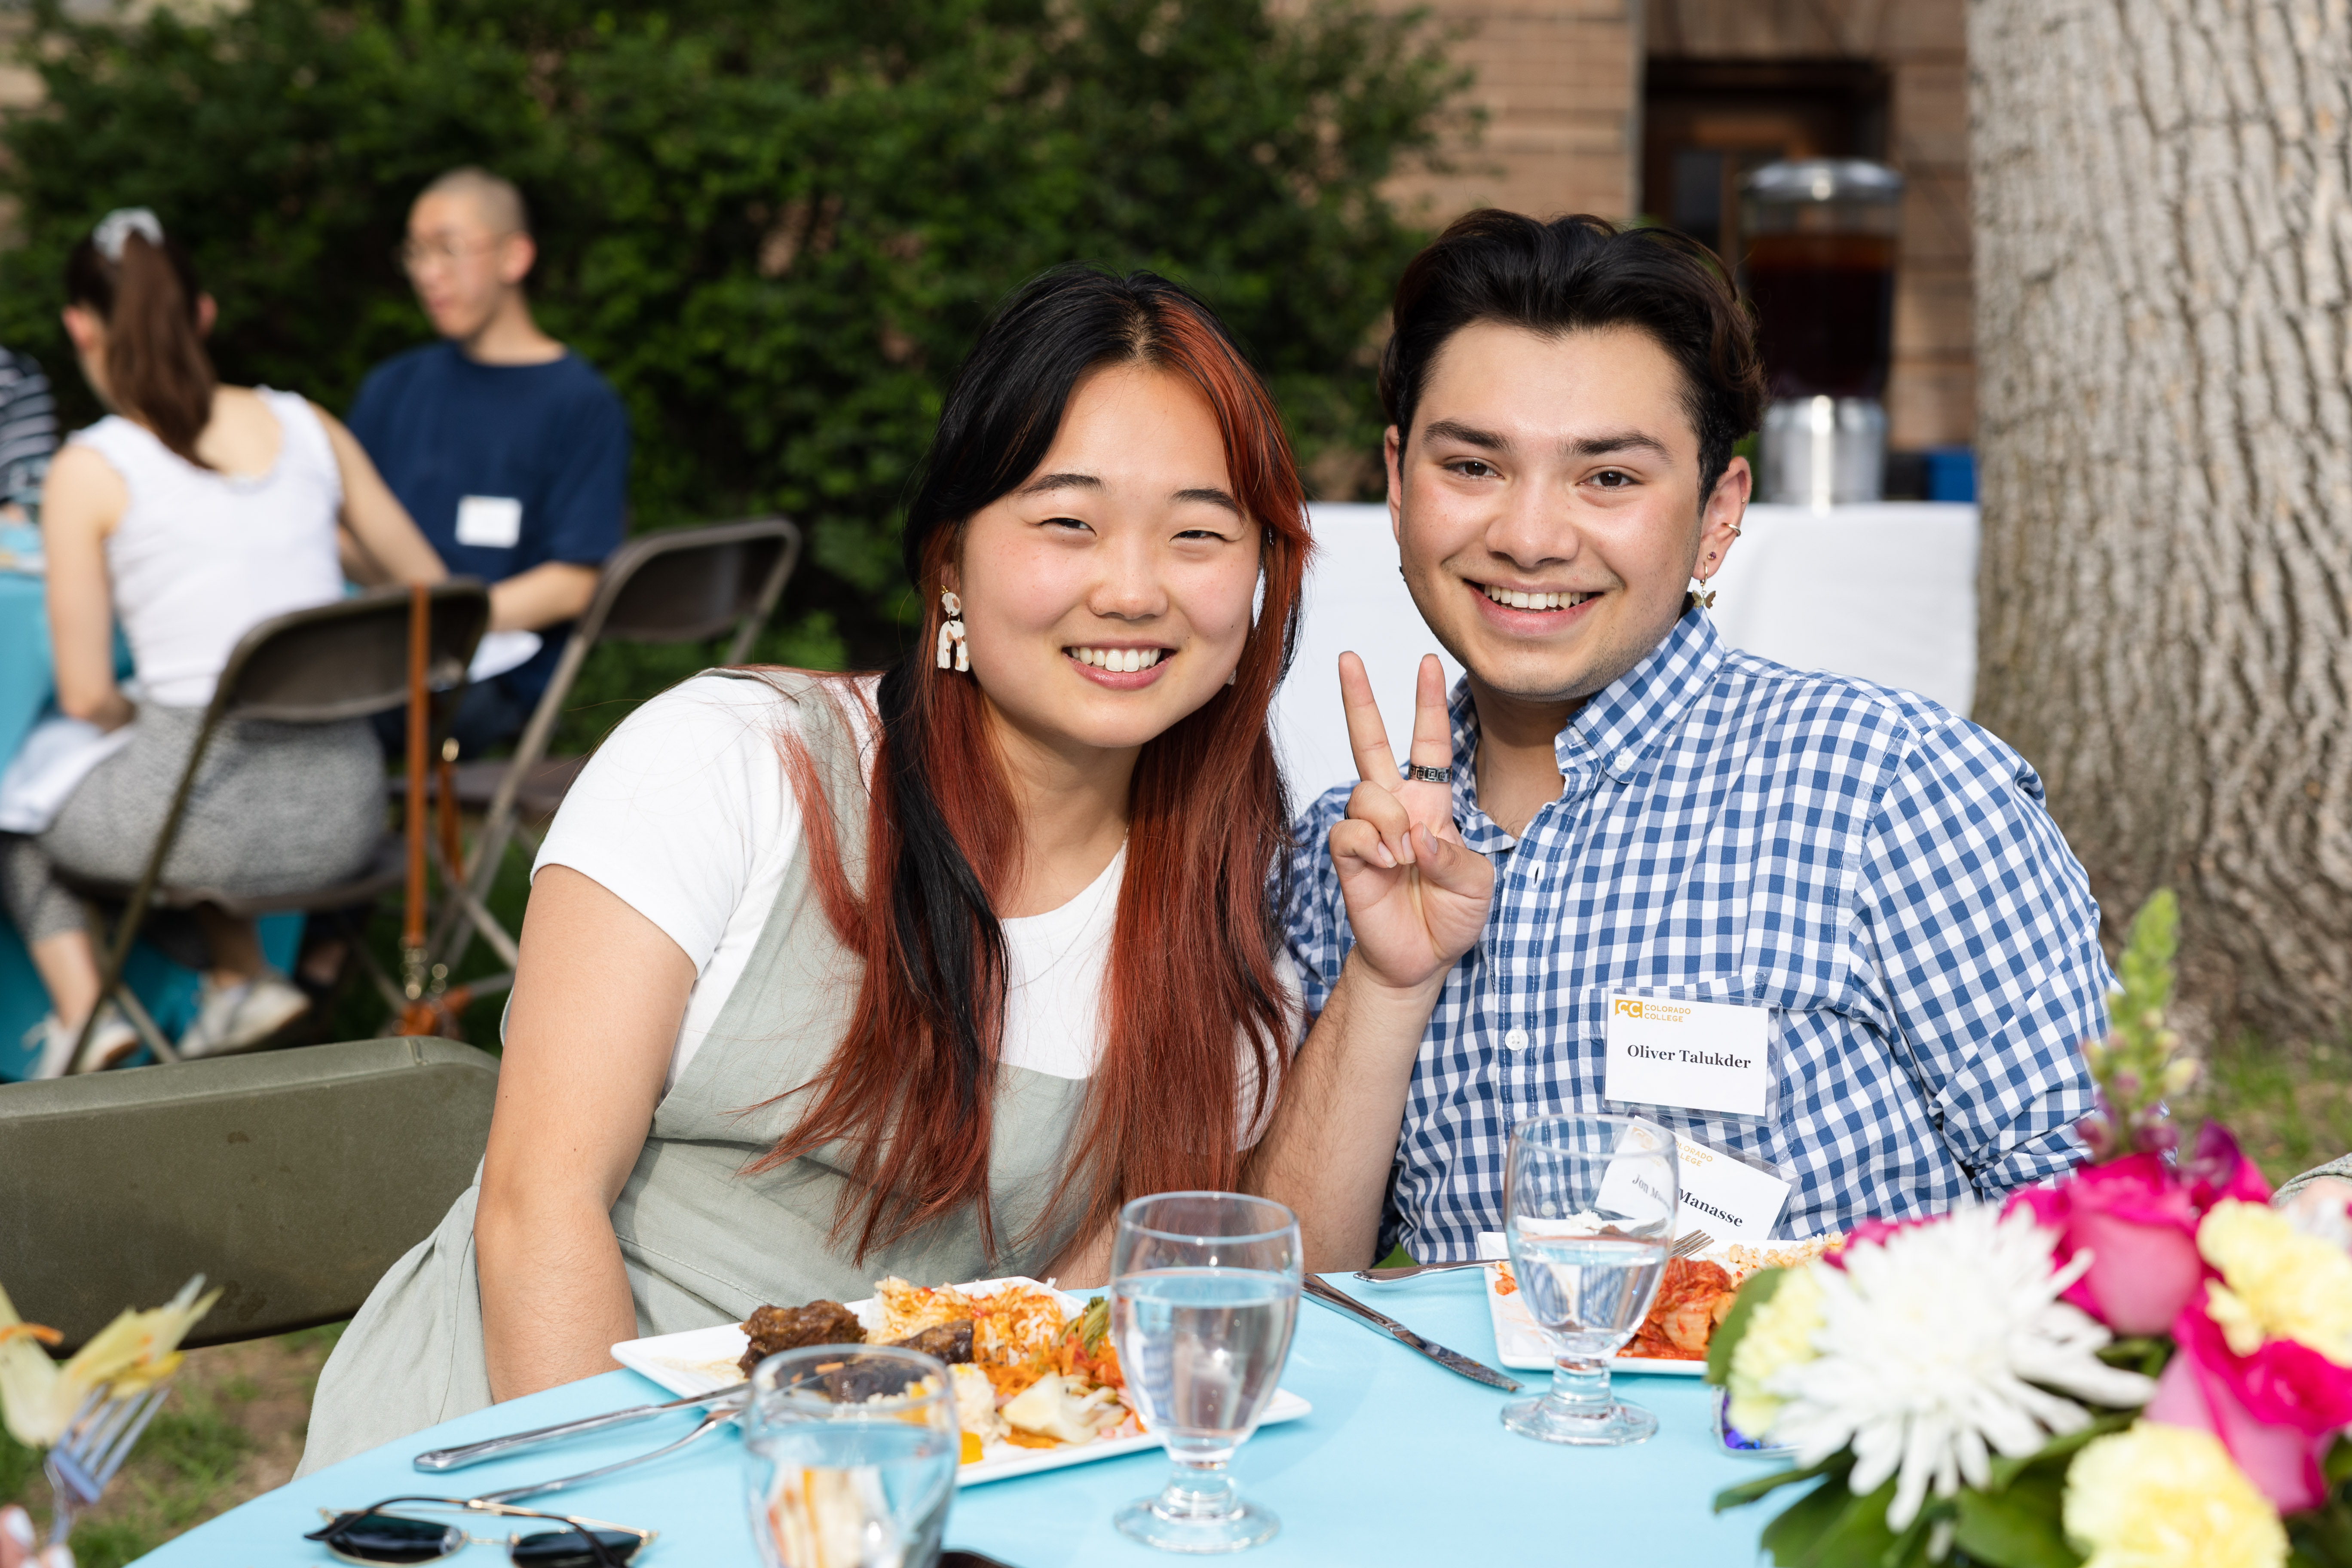 '22 Fellows Elise Kim & Oliver Talukder at the Korean BBQ hosted by President Richarson <span class="cc-gallery-credit">[Chidera Ikpeamarom]</span>